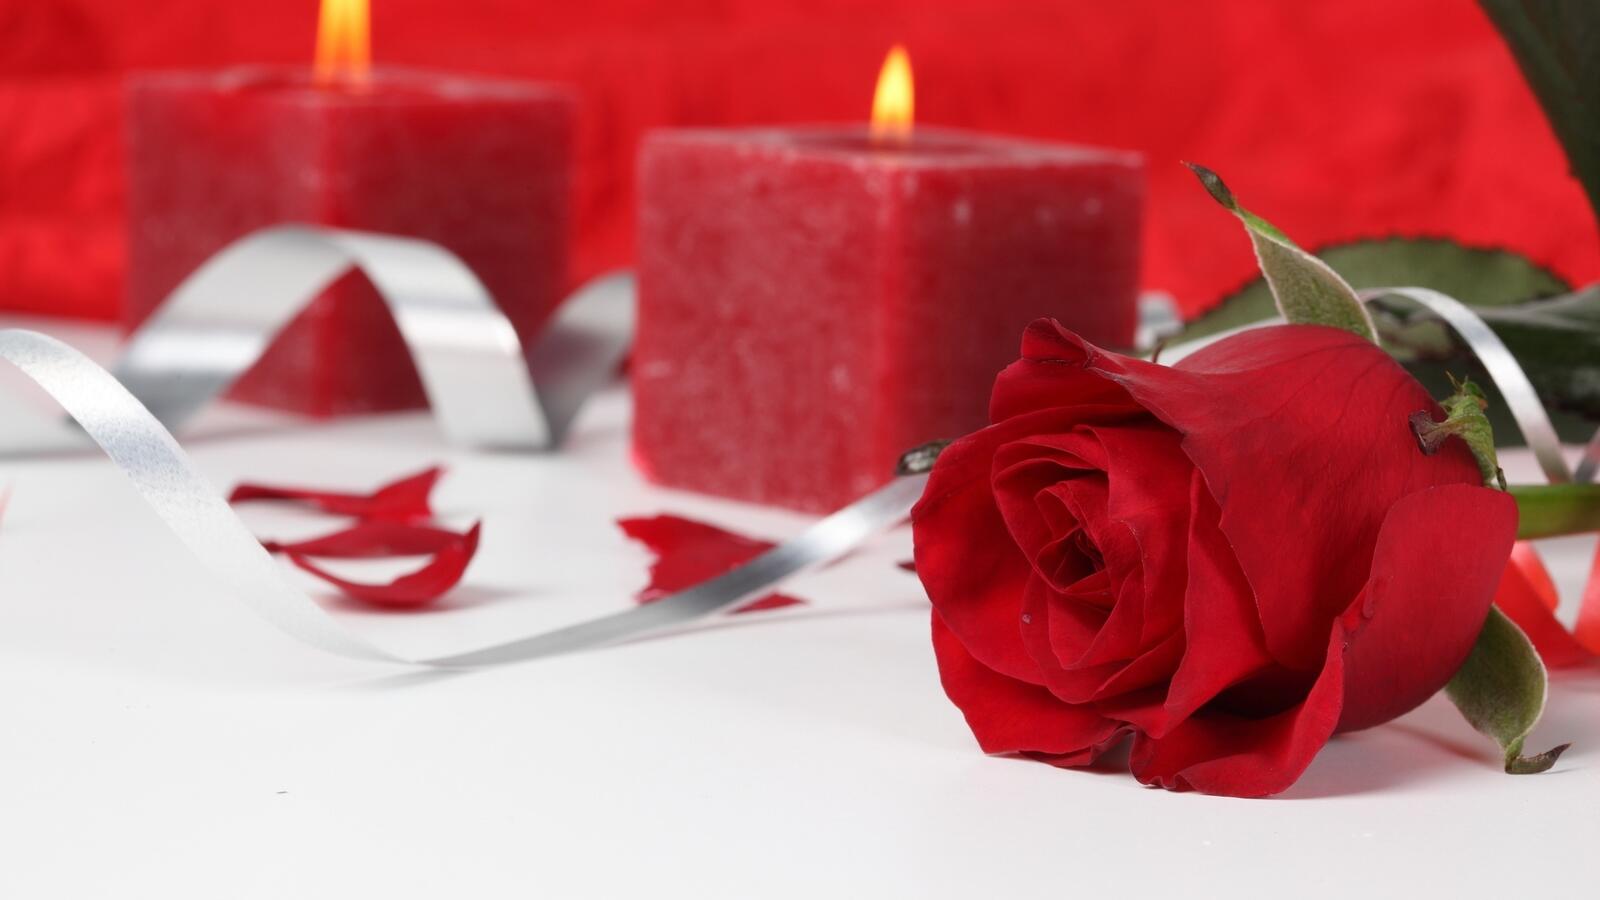 Wallpapers red candle fire on the desktop